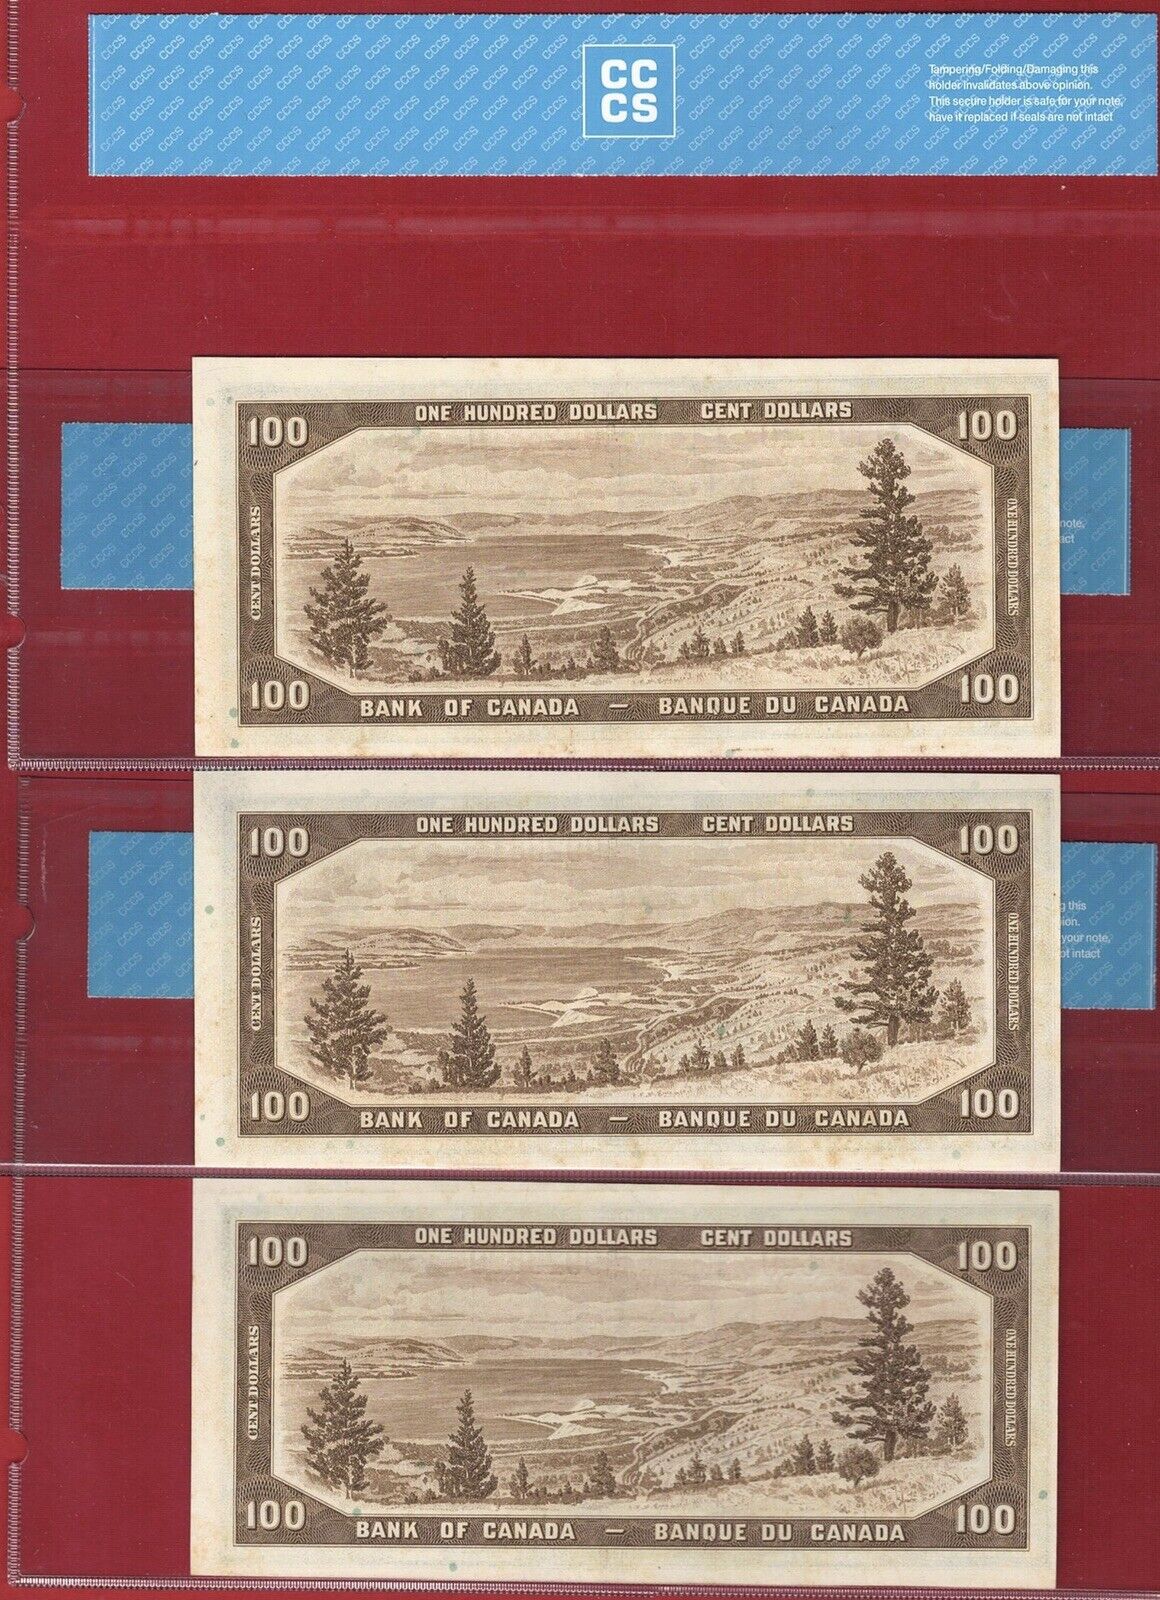 1954 Bank Of Canada $100 Modified Lawson/Bouey Consecutive Series - CCCS Unc63 -